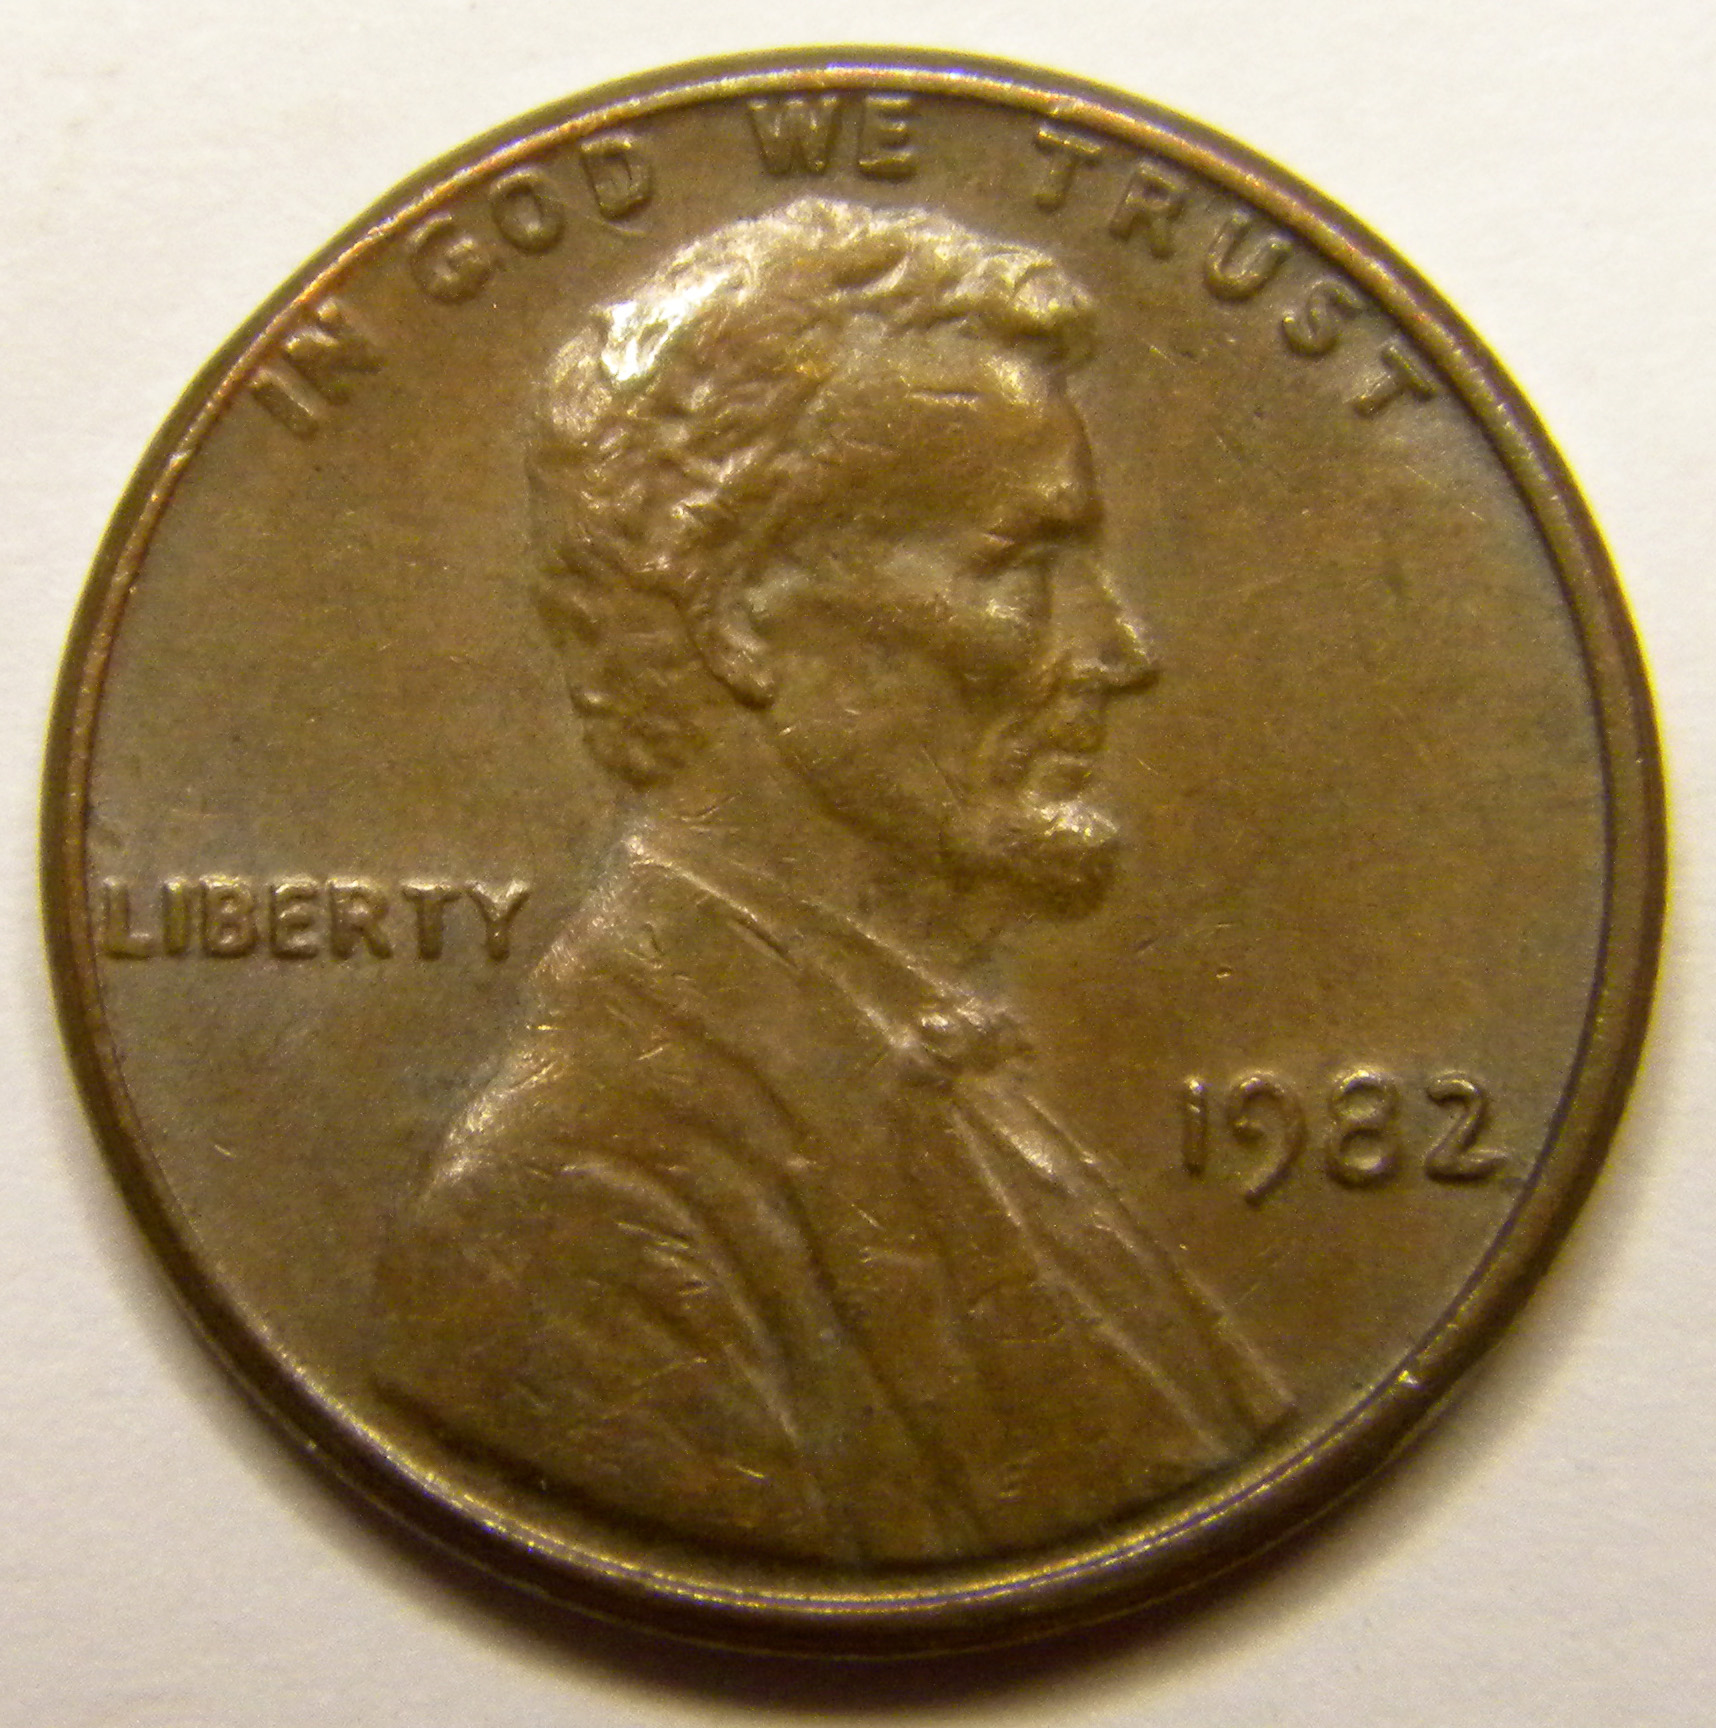 1982 Lincoln Penny - Obverse.jpg